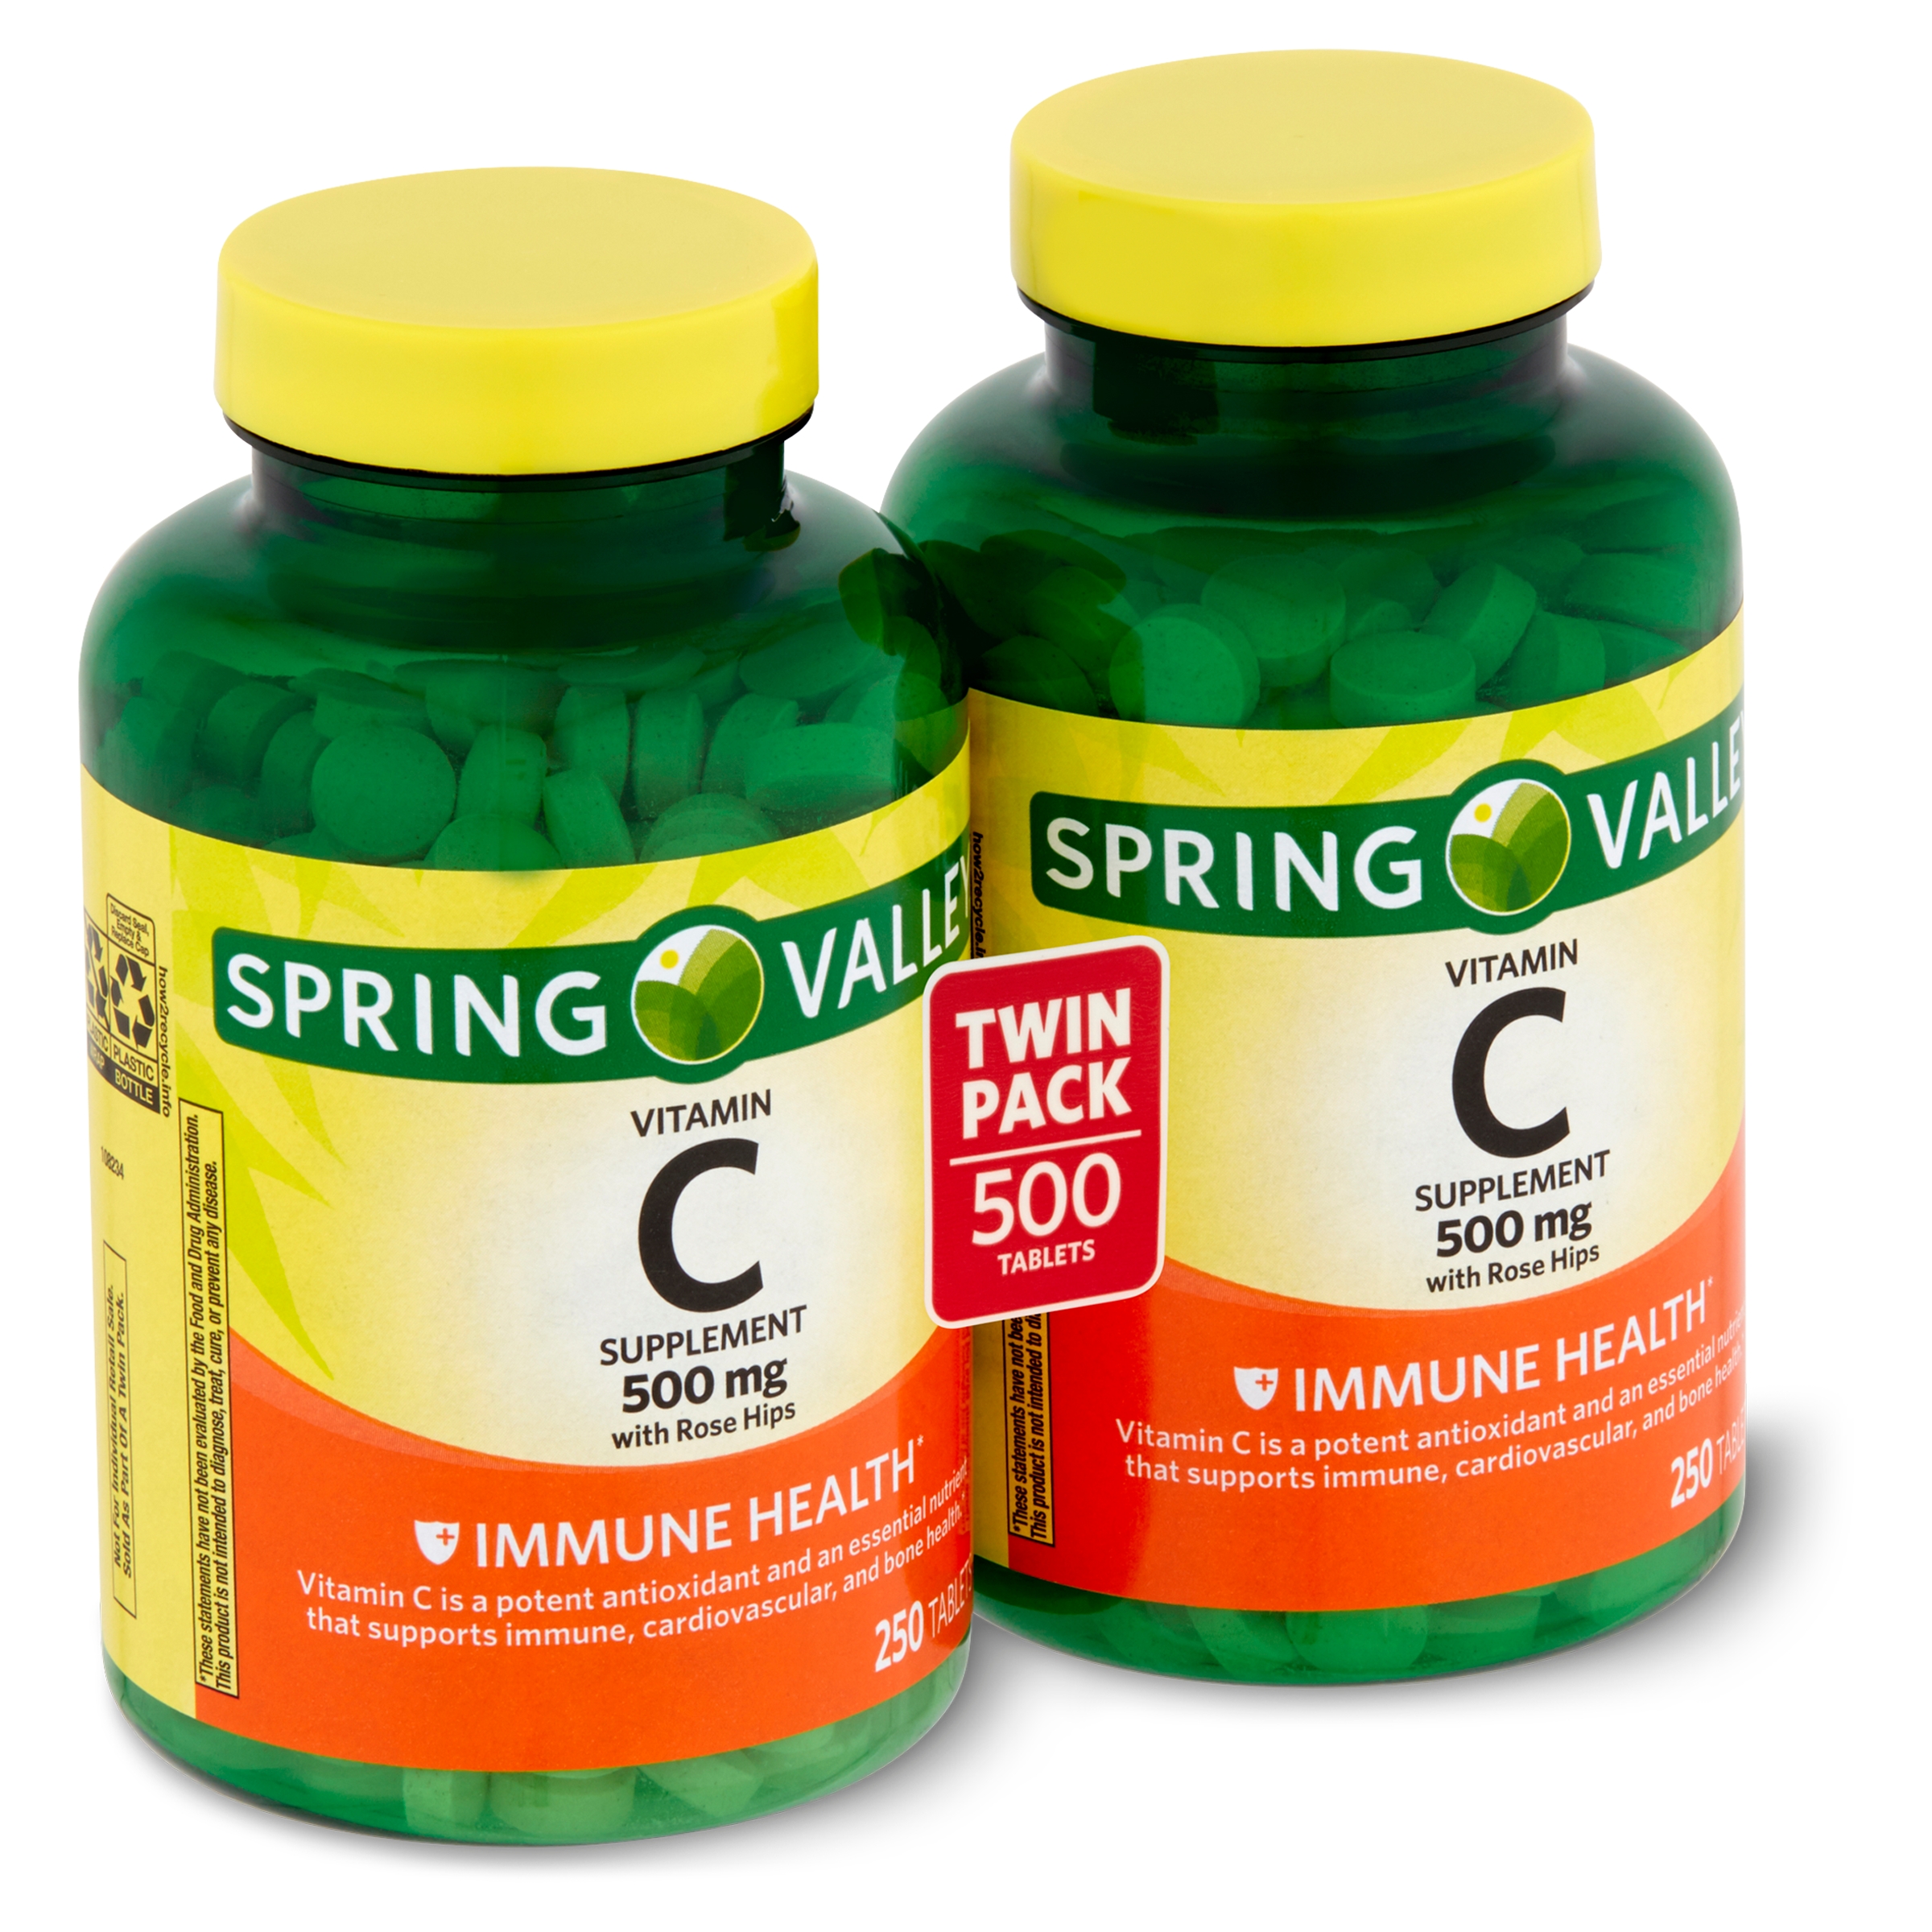 Spring Valley Vitamin C Supplement with Rose Hips, 500 mg, 500 Count, 2 Pack - image 2 of 9